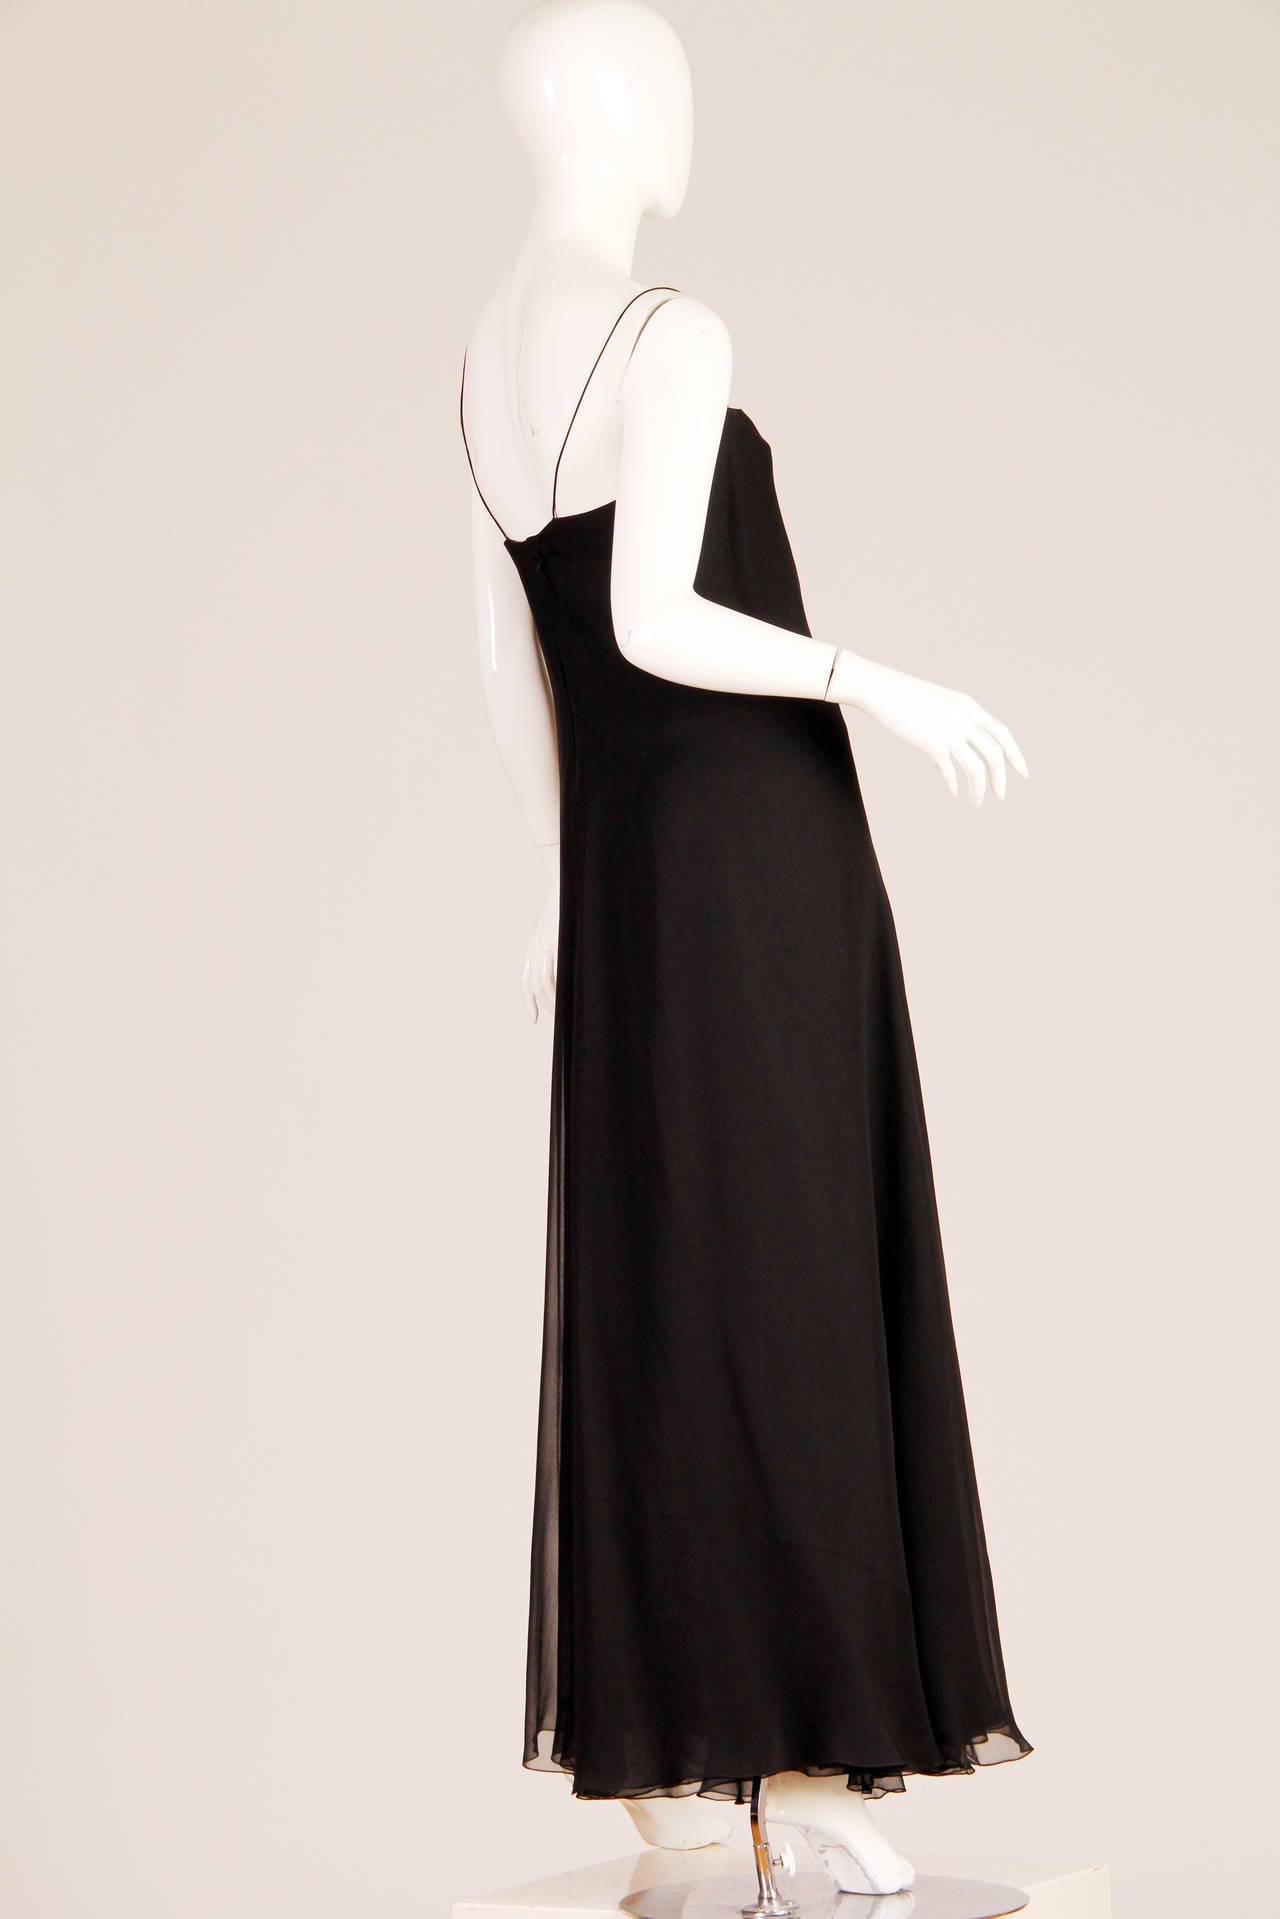 After there was Vionnet, and before there was Galliano, there was George Stavropoulos mastering the bias cut in the 1970s. A lesser known contemporary of Halston, and rightfully so. The Stavropoulos lady would never be as loud and brash as a